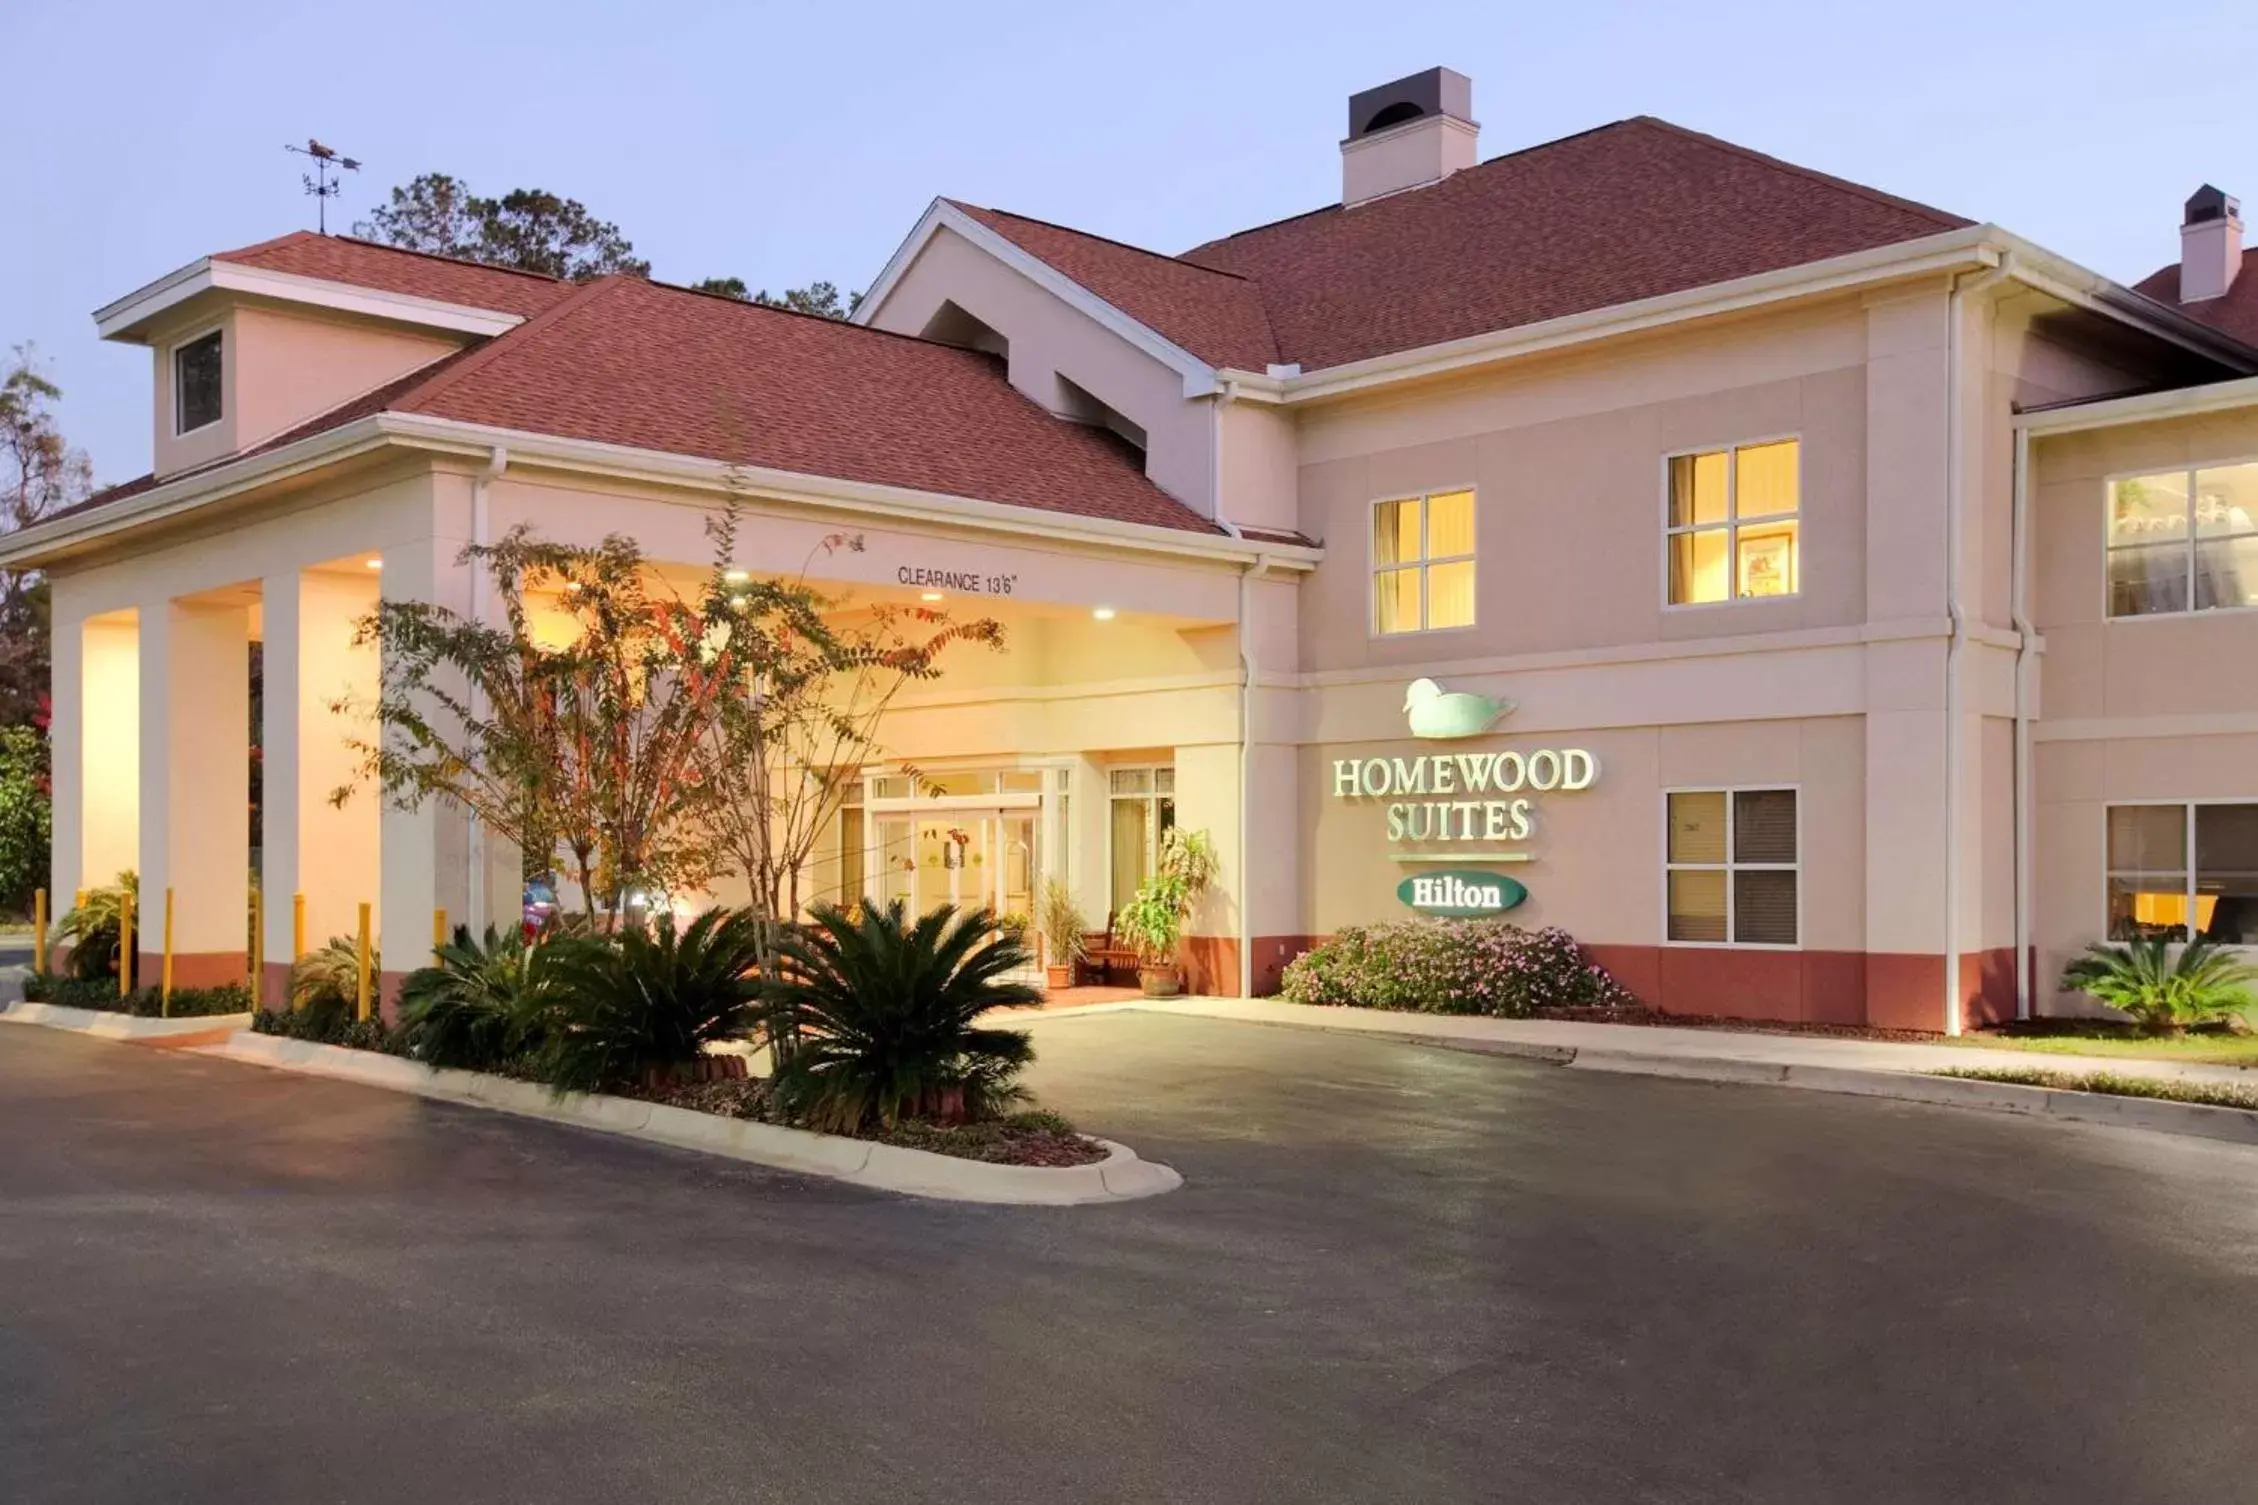 Property Building in Homewood Suites by Hilton Tallahassee